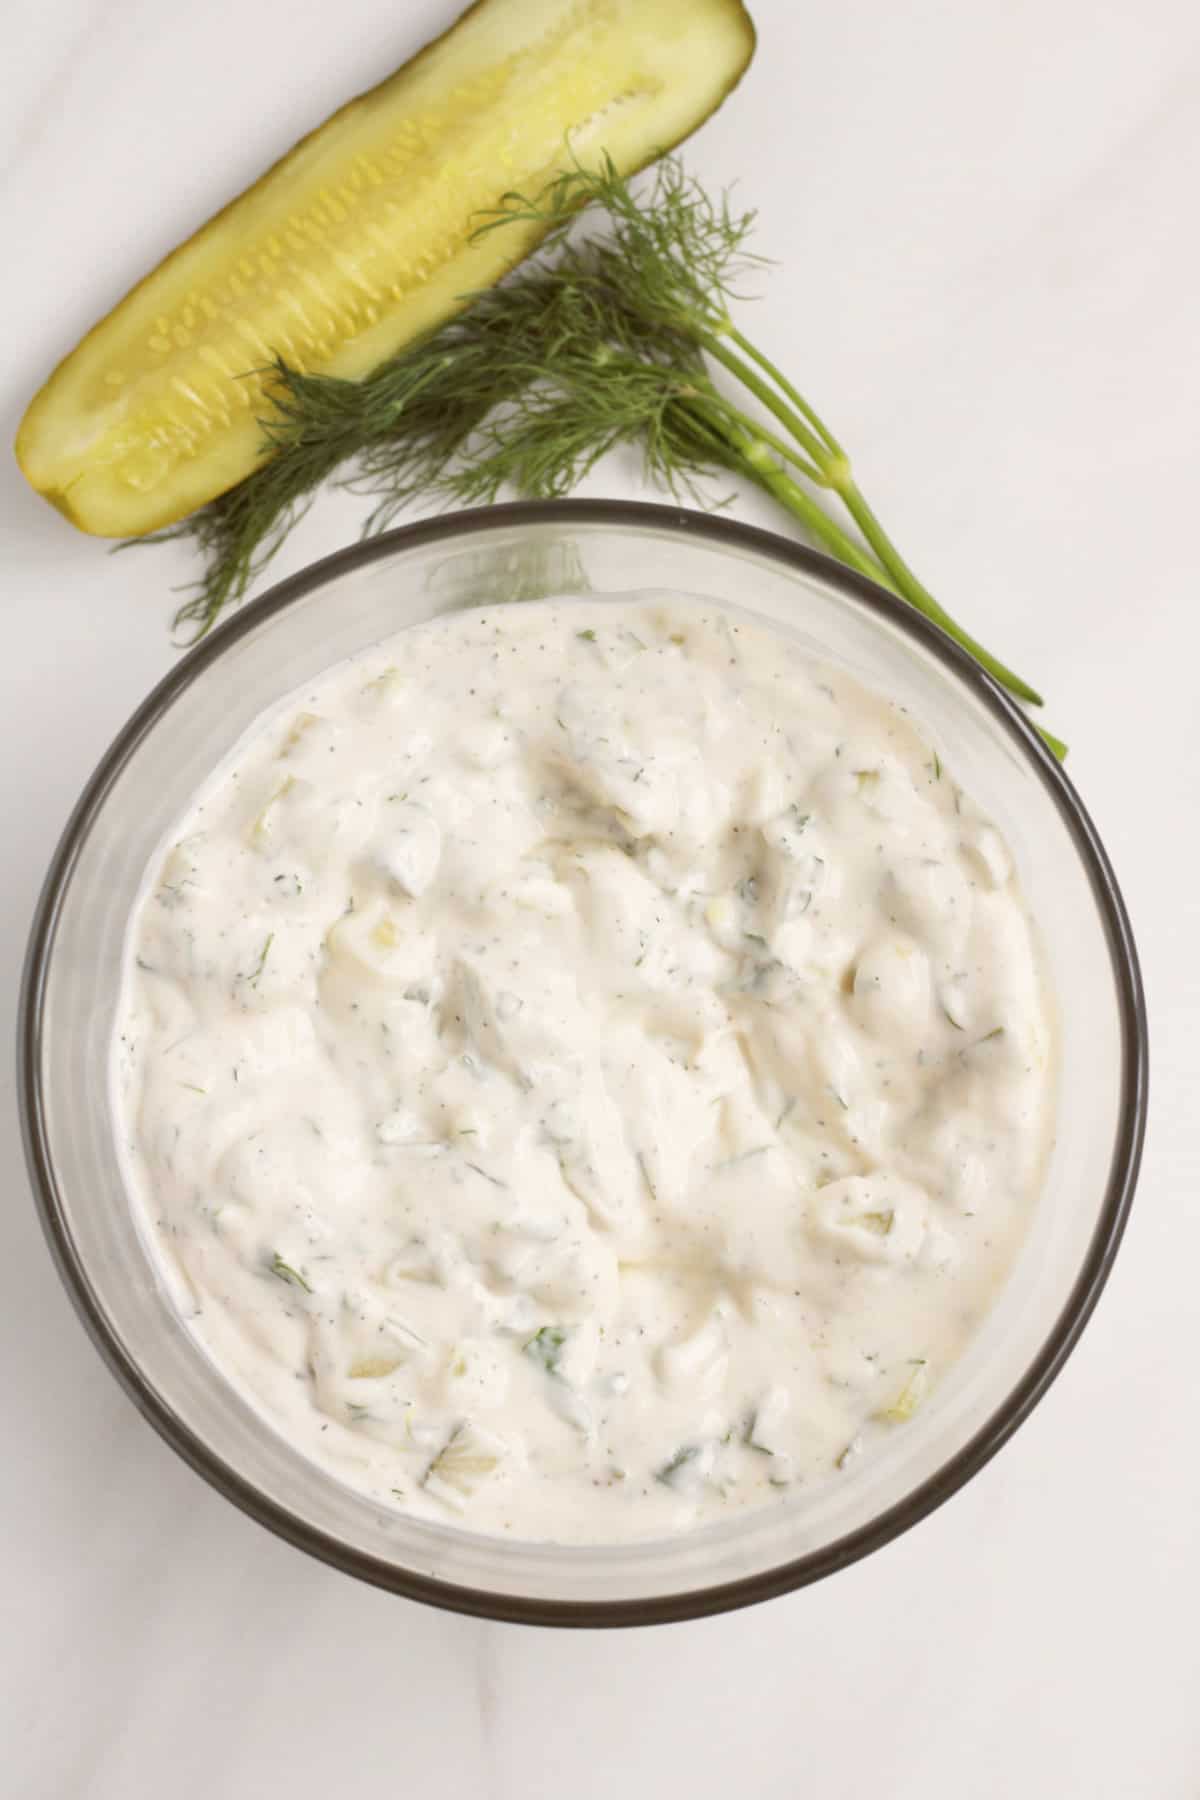 clear glass bowl of tartar sauce mixed with dill pickles and dill weed.